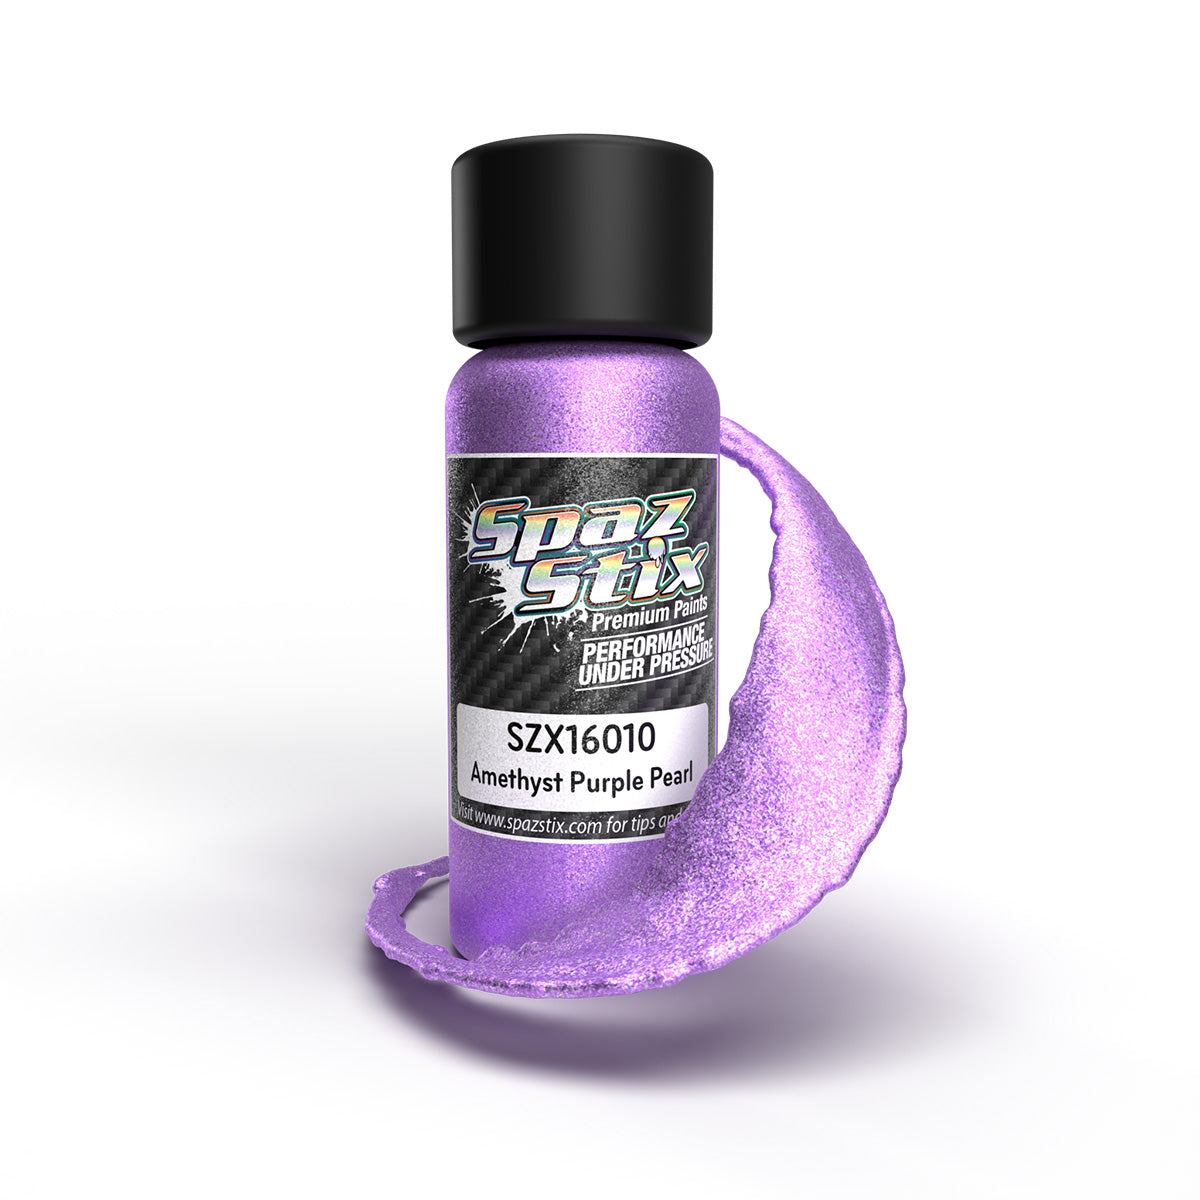 Magic Colours Metallic Airbrush Paint 55 ml - Violet  Bee's Baked Art  Supplies and Artfully Designed Creations